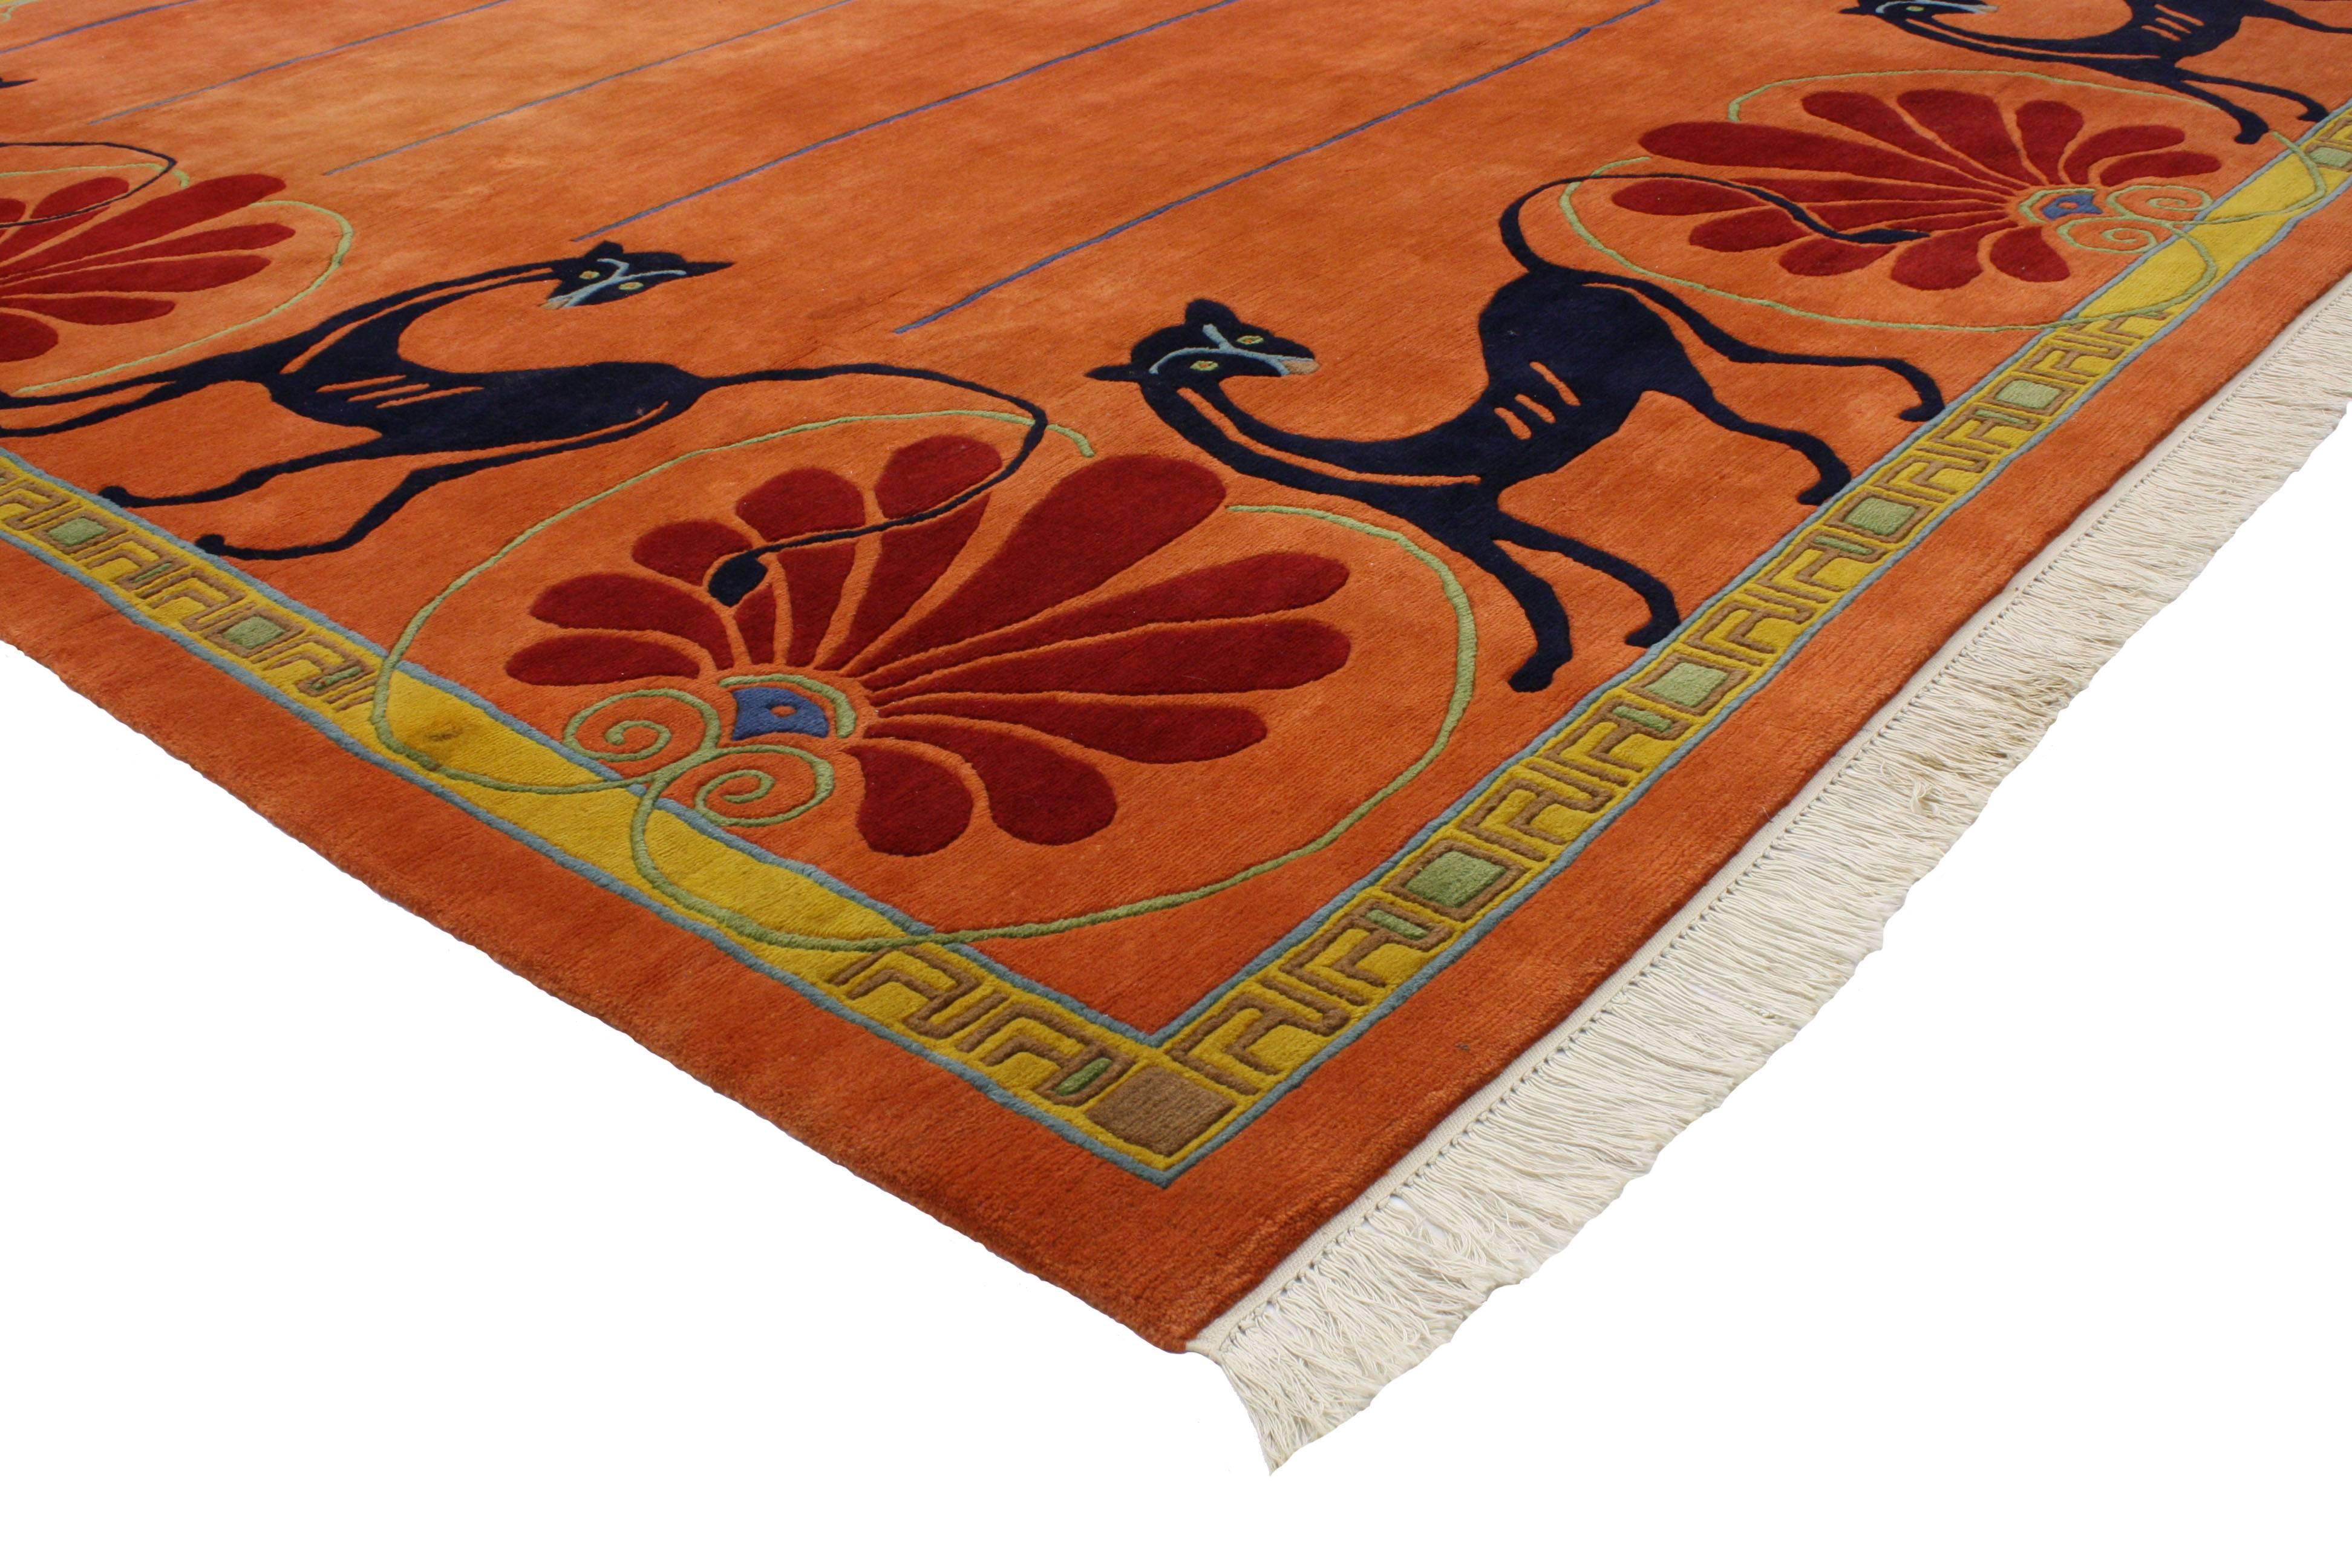 Infuse your space with this vintage Tibetan orange rug with black cats. Combining the ancient Tibetan art with contemporary design, this fashion-forward contemporary rug from Tibet will add much-needed color and texture. Featuring four black